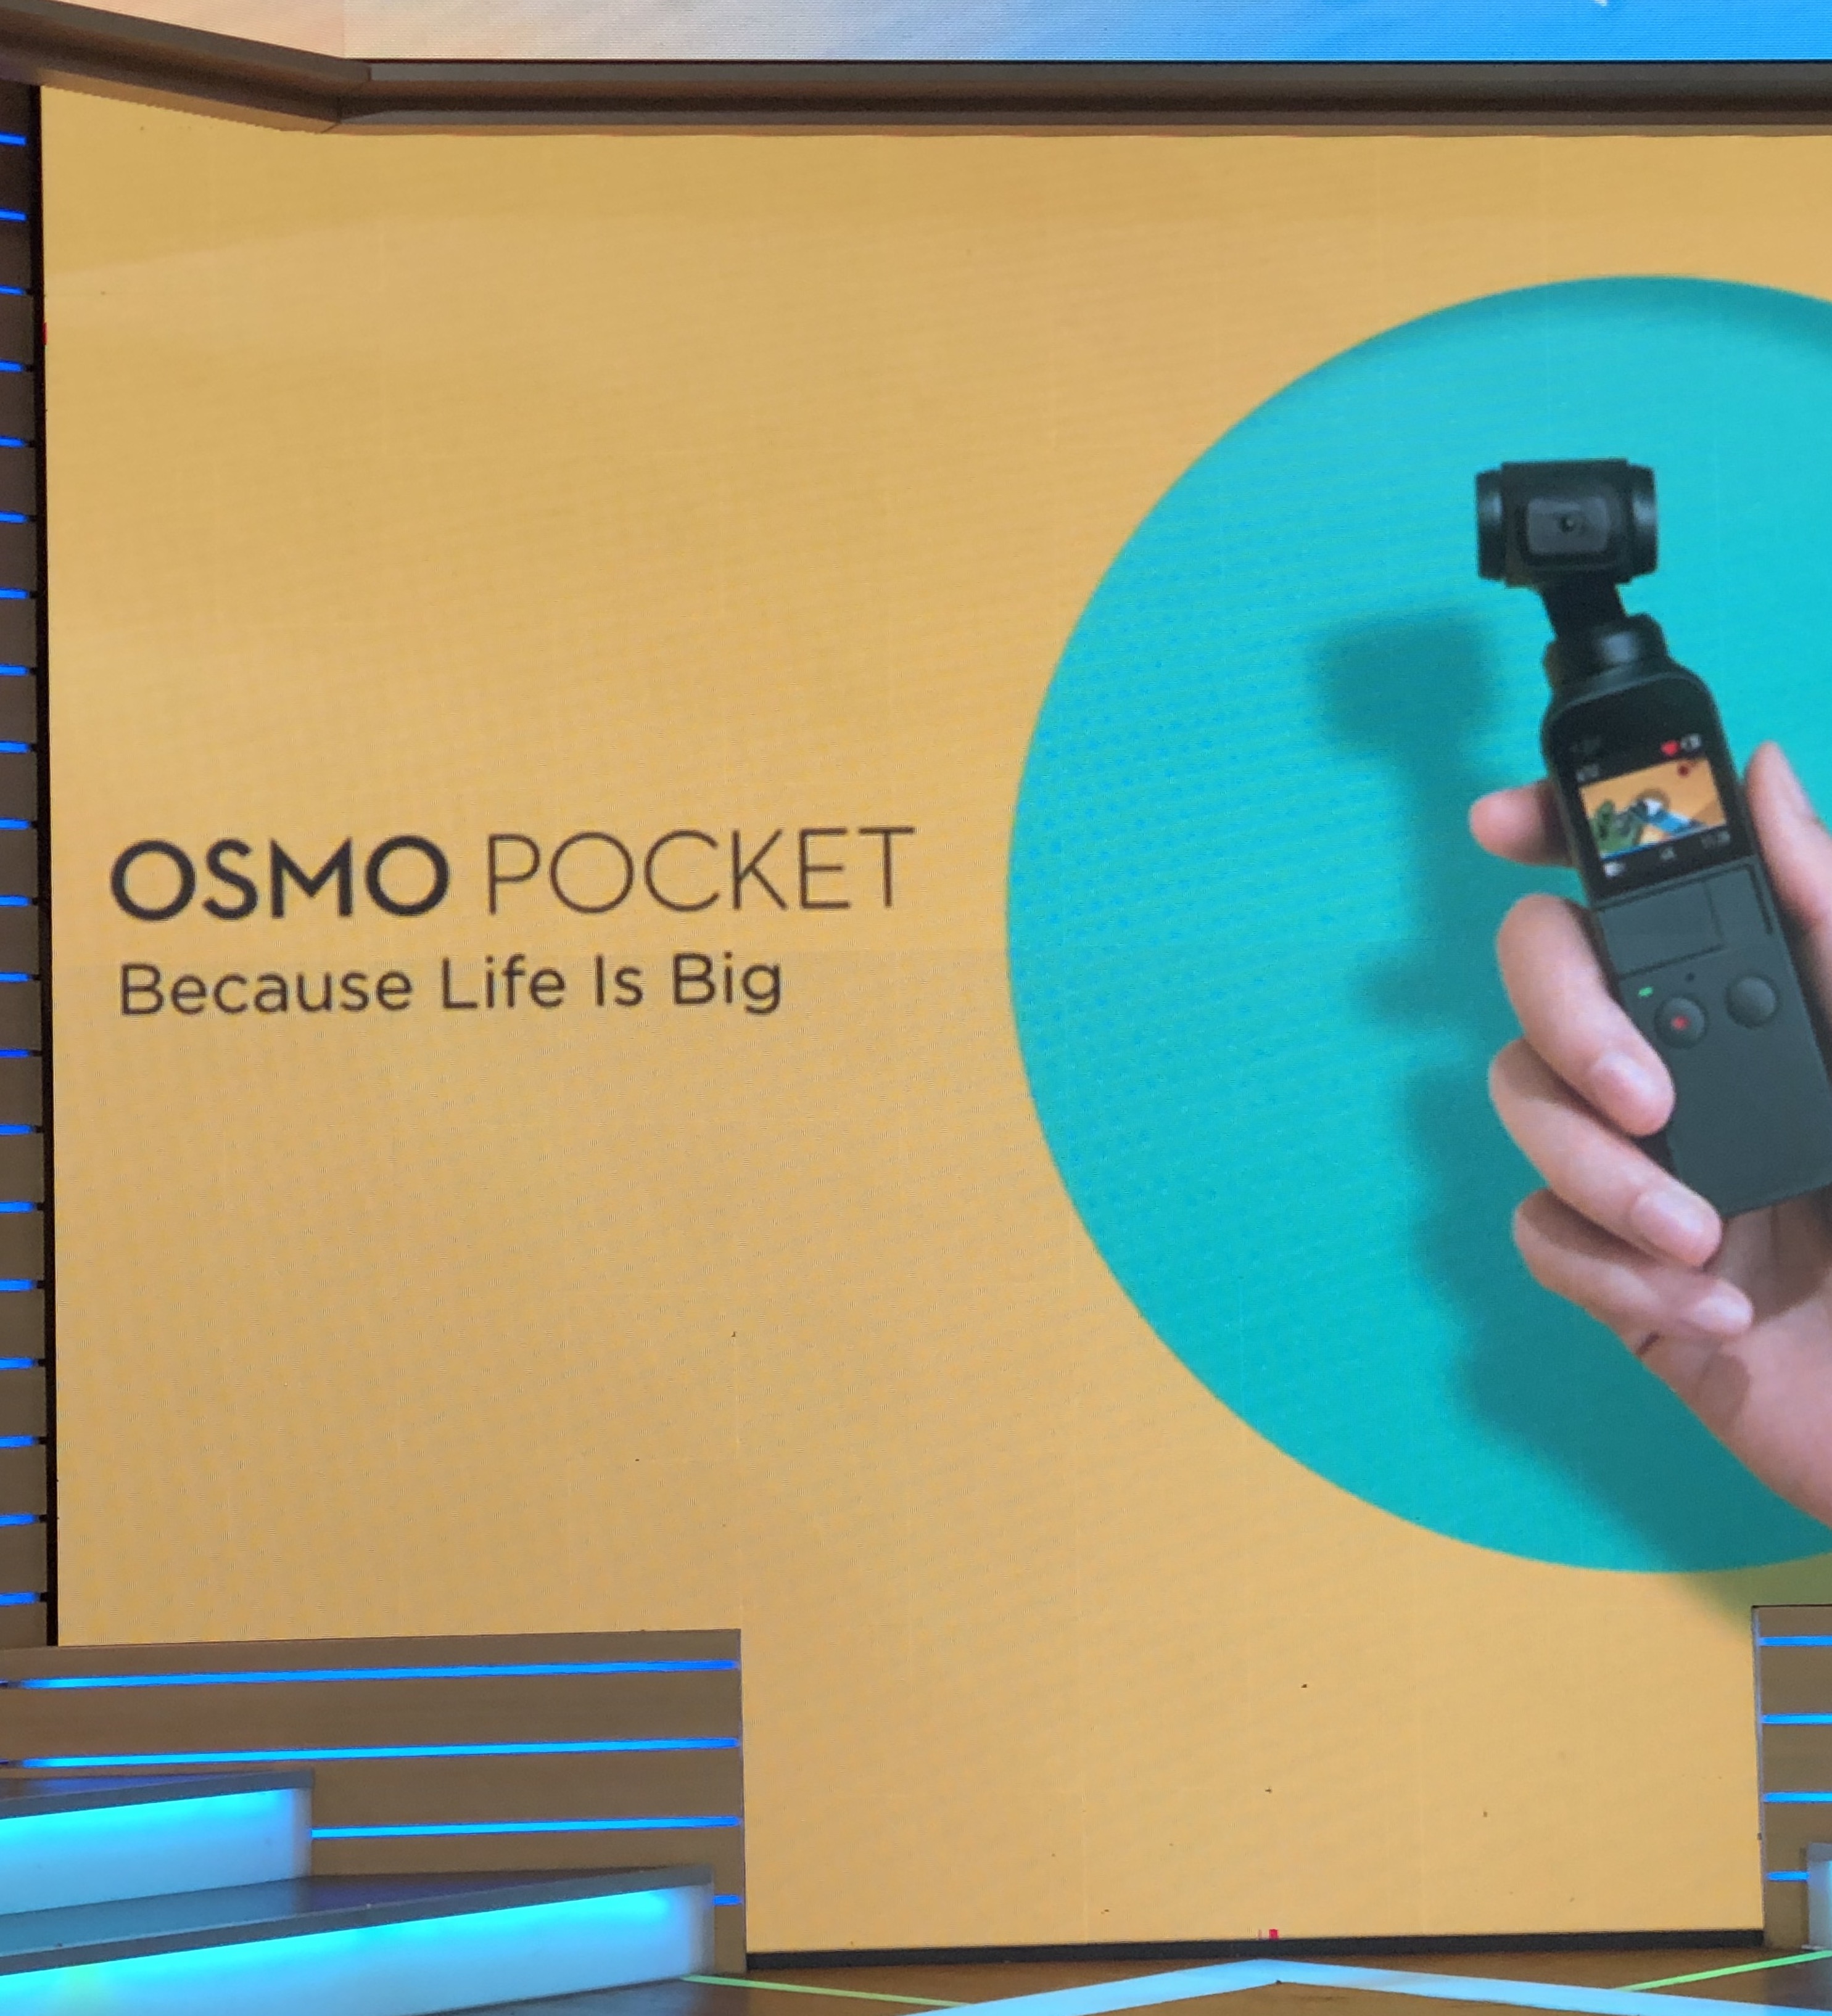 Say Goodbye To Gopro Family Footage Just Became More Enjoyable Thanks To The Osmo Pocket Drone U